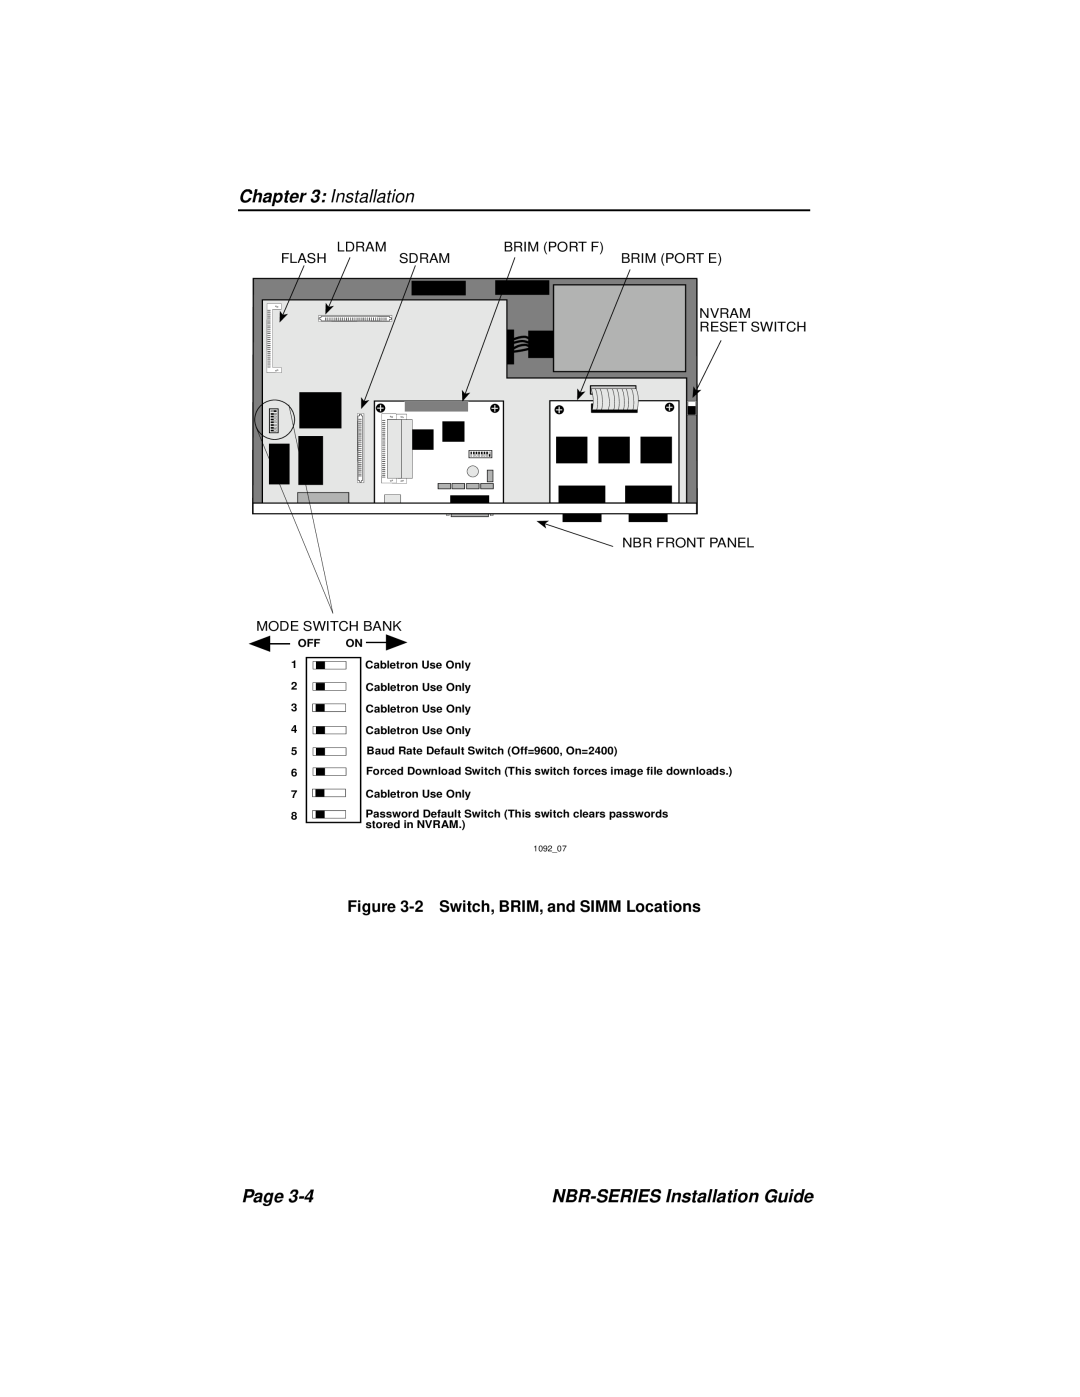 Cabletron Systems NBR-420 Page, NBR-SERIES Installation Guide, 2 Switch, BRIM, and SIMM Locations, Flash, Ldram, Sdram 